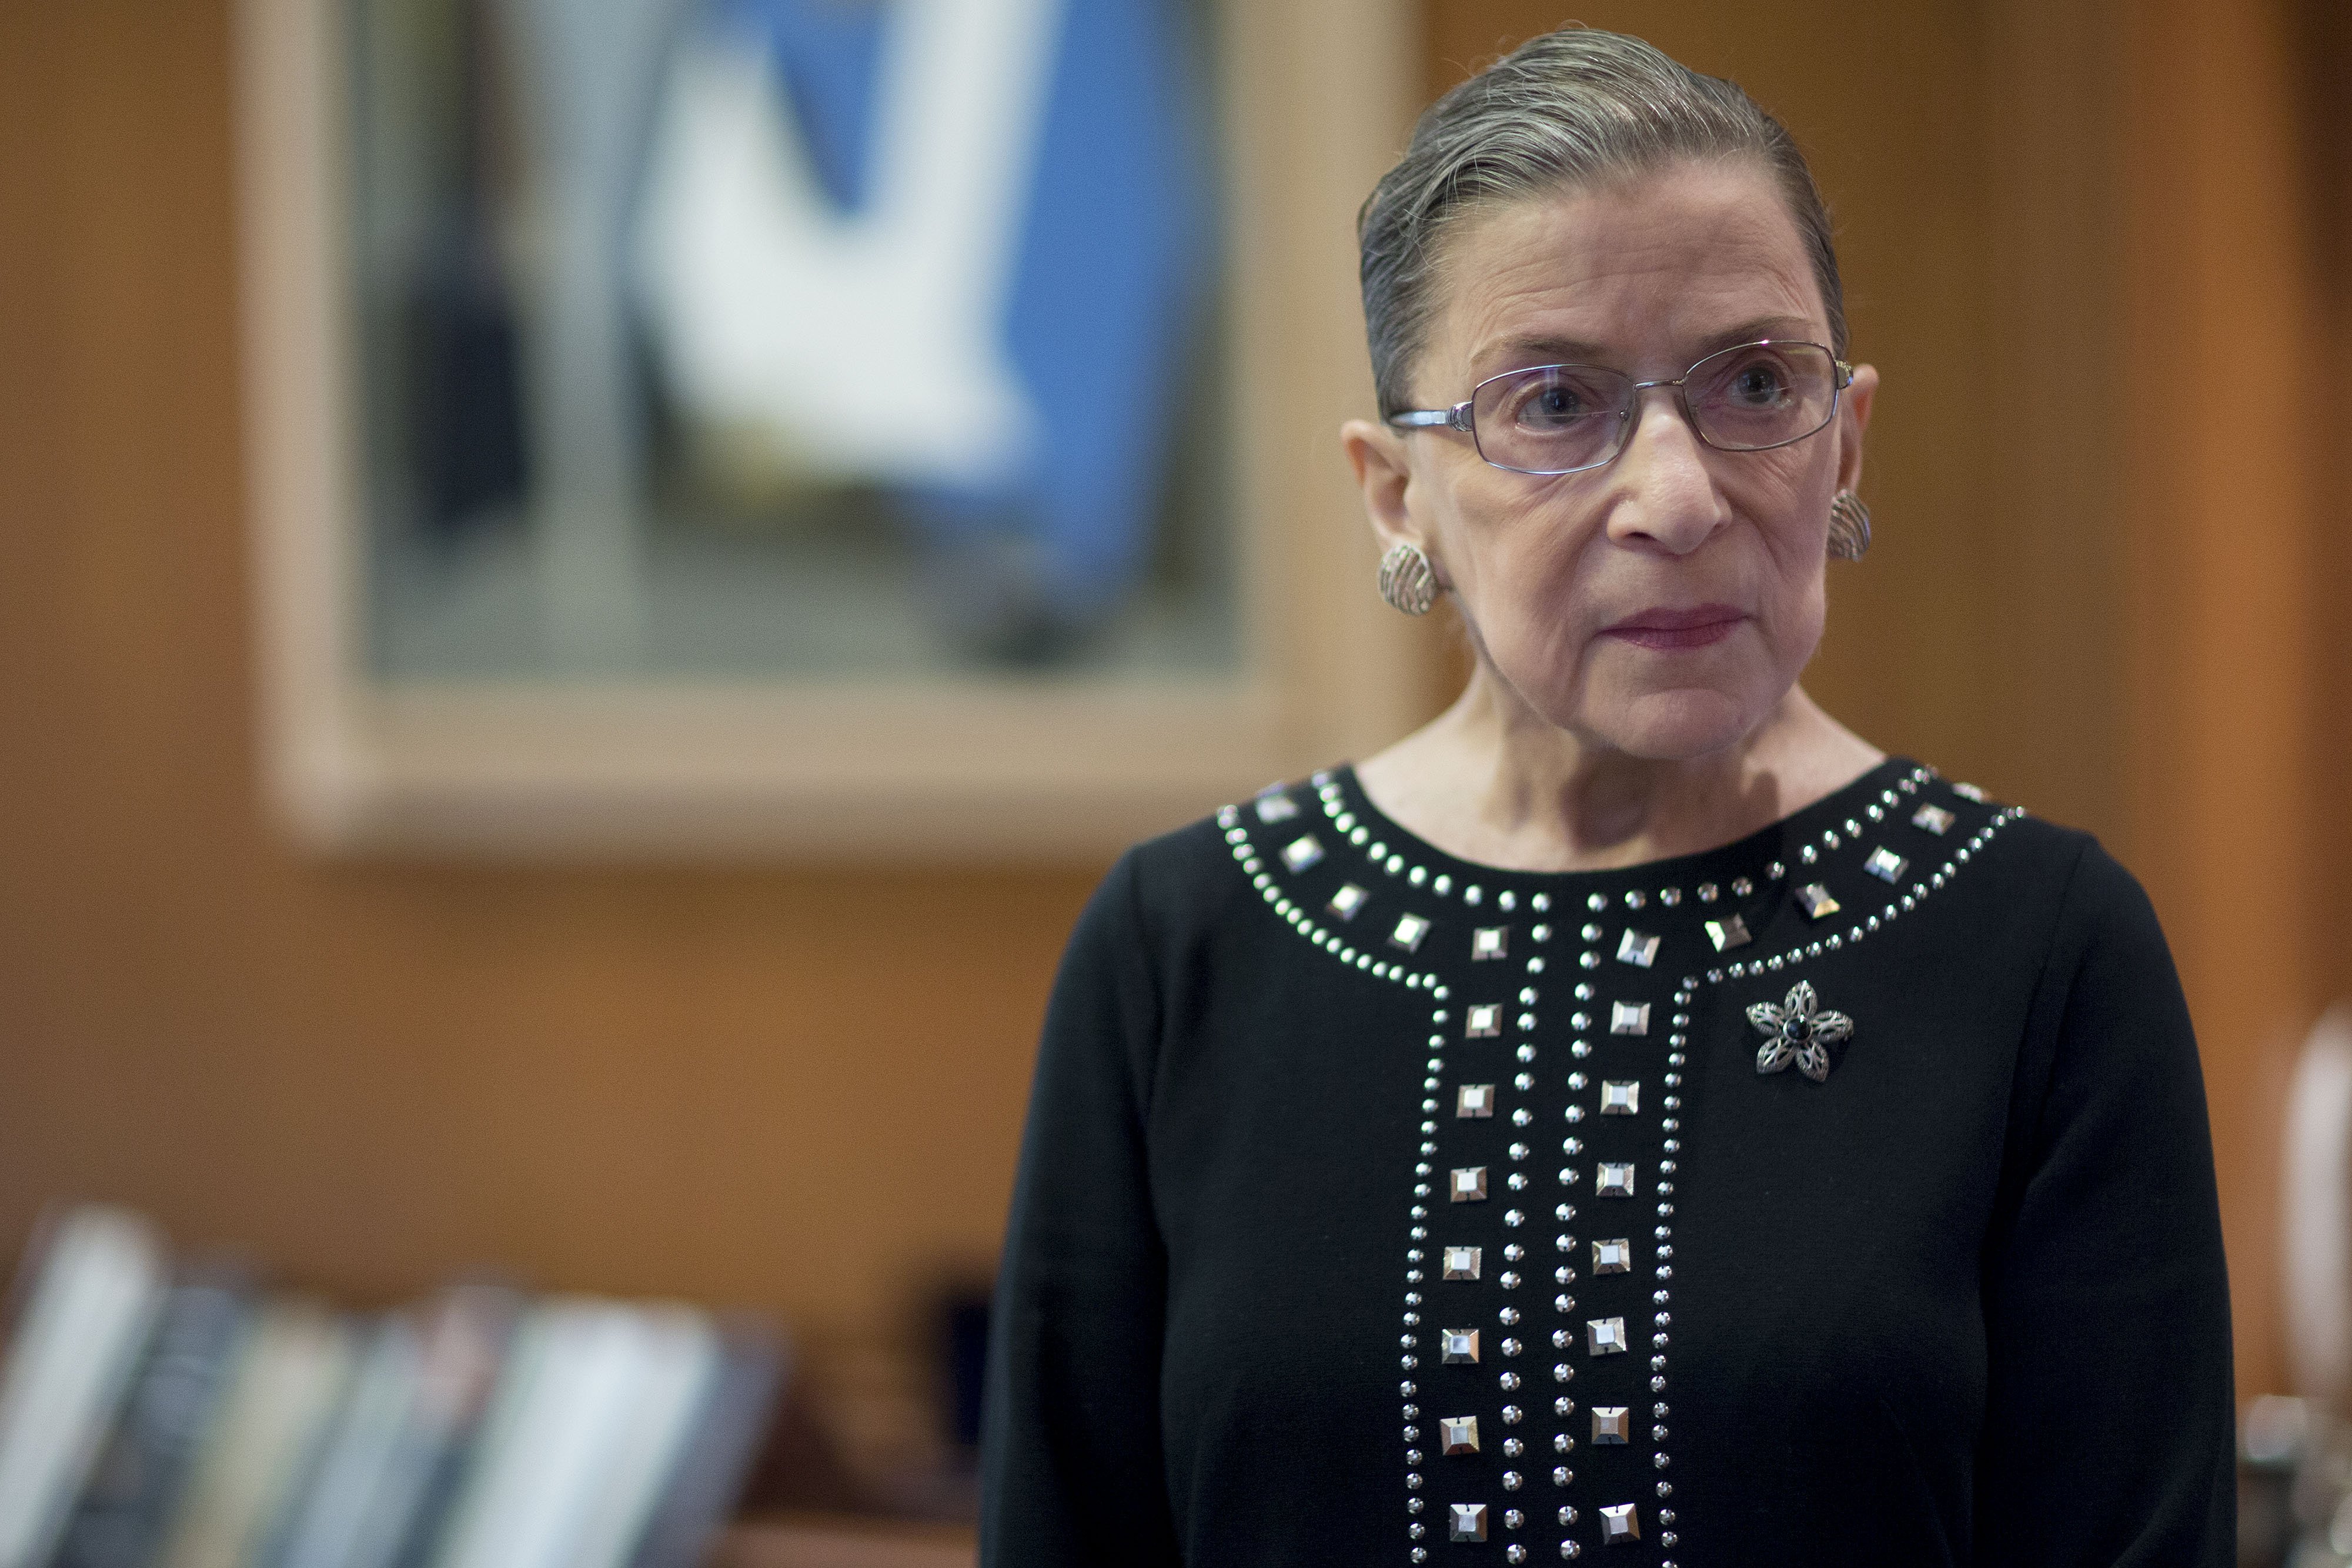  Supreme Court Justice Ruth Bader Ginsburg on August 23 2013 in Washington D.C | Source: Getty Images